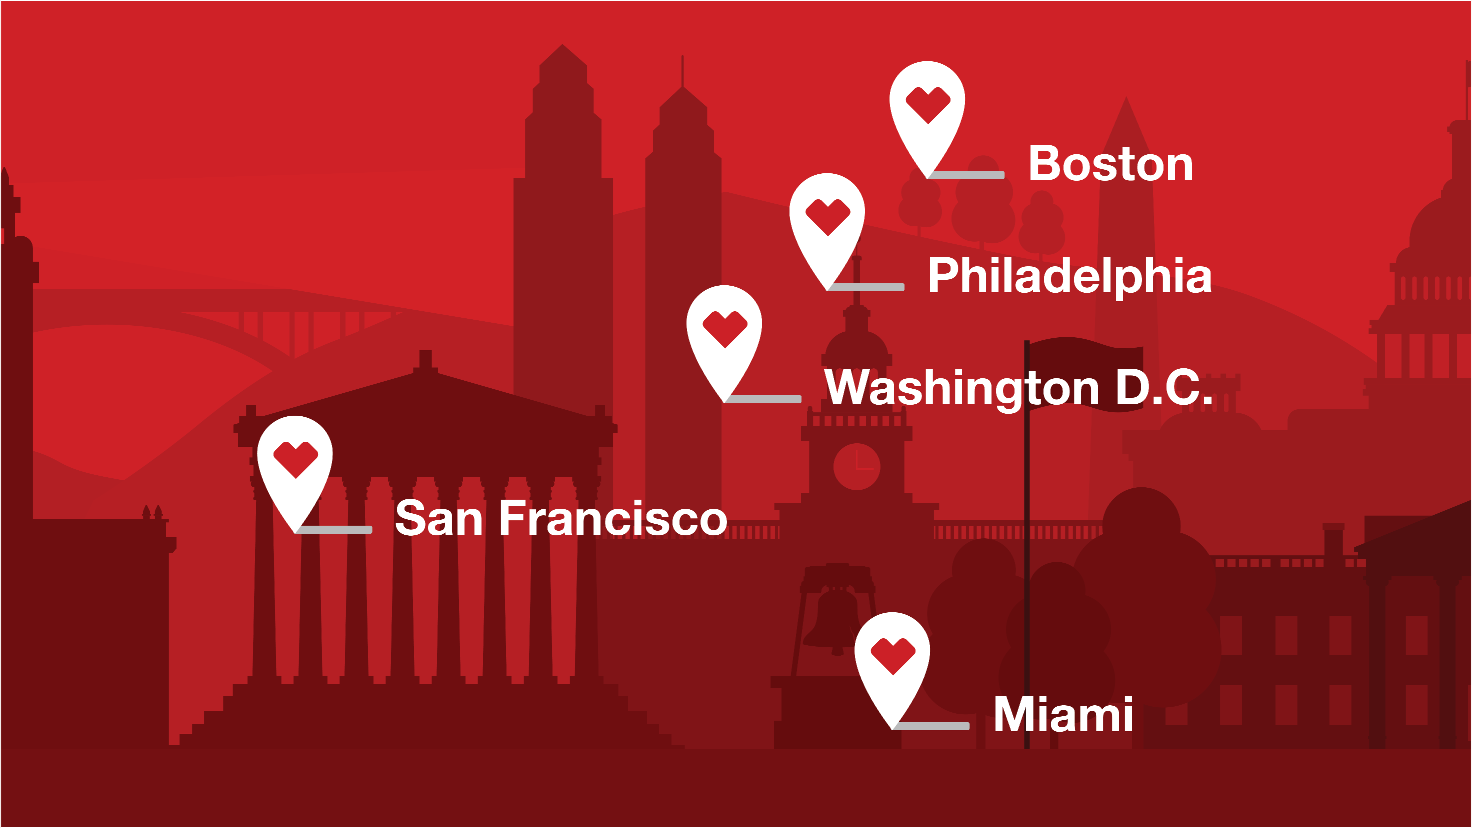 Location pins identifying the cities using CVS Pharmacy delivery.